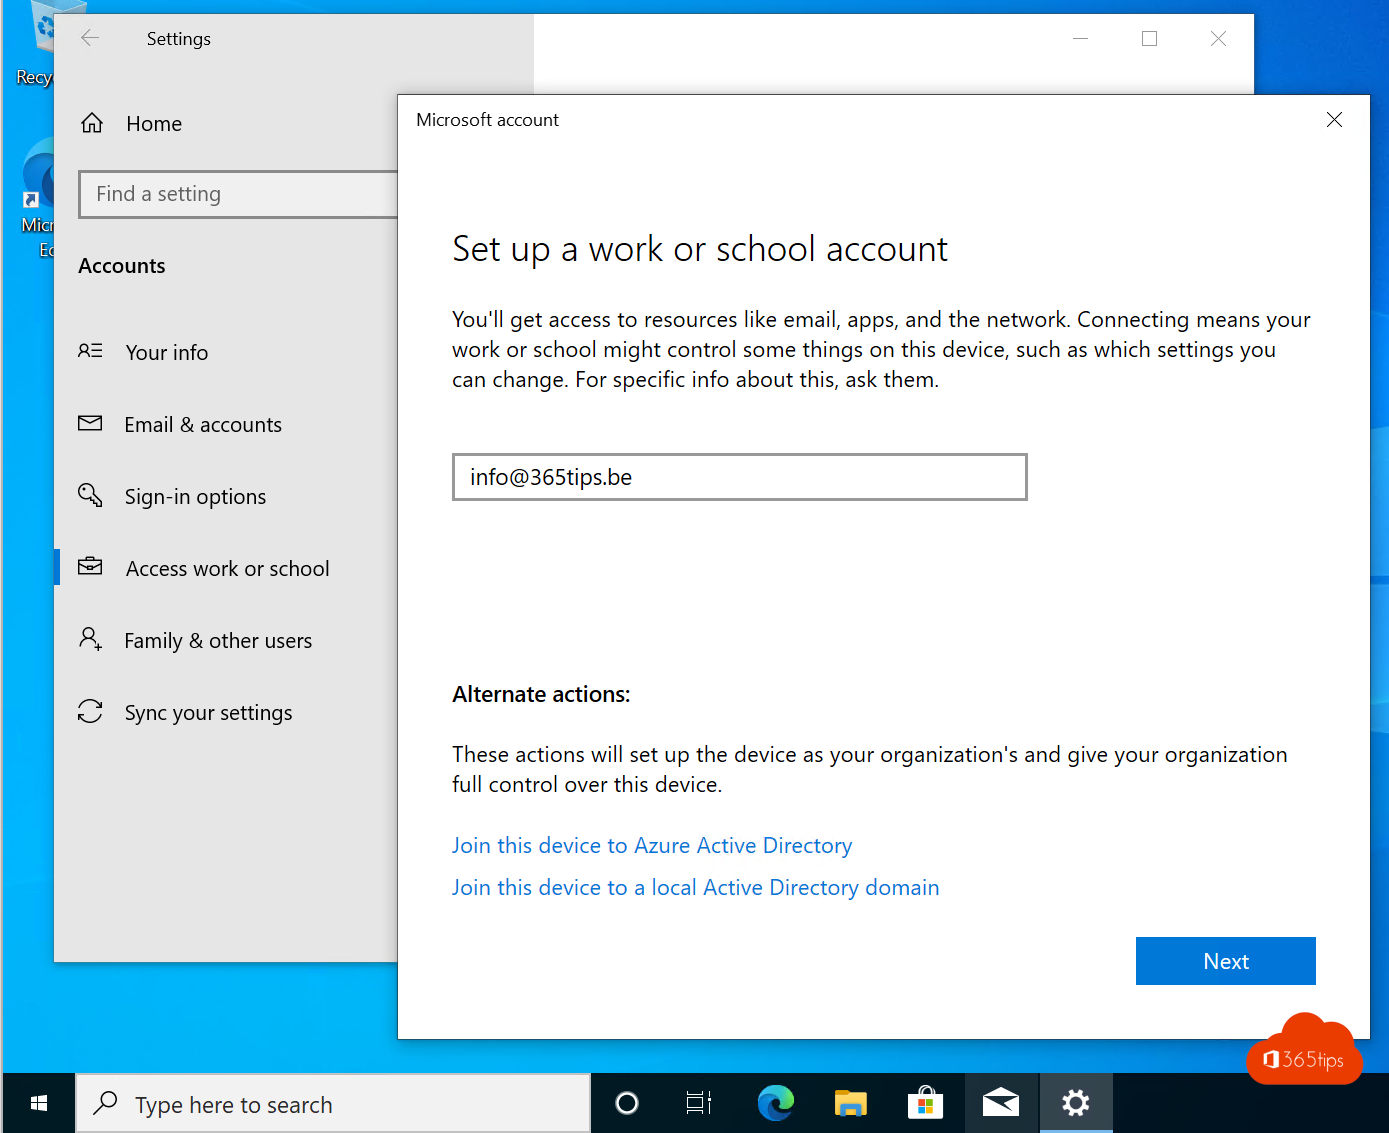 👩‍💻Voeg add your Office 365 work account to your home computer in 5 steps | Windows 10 &amp; 11